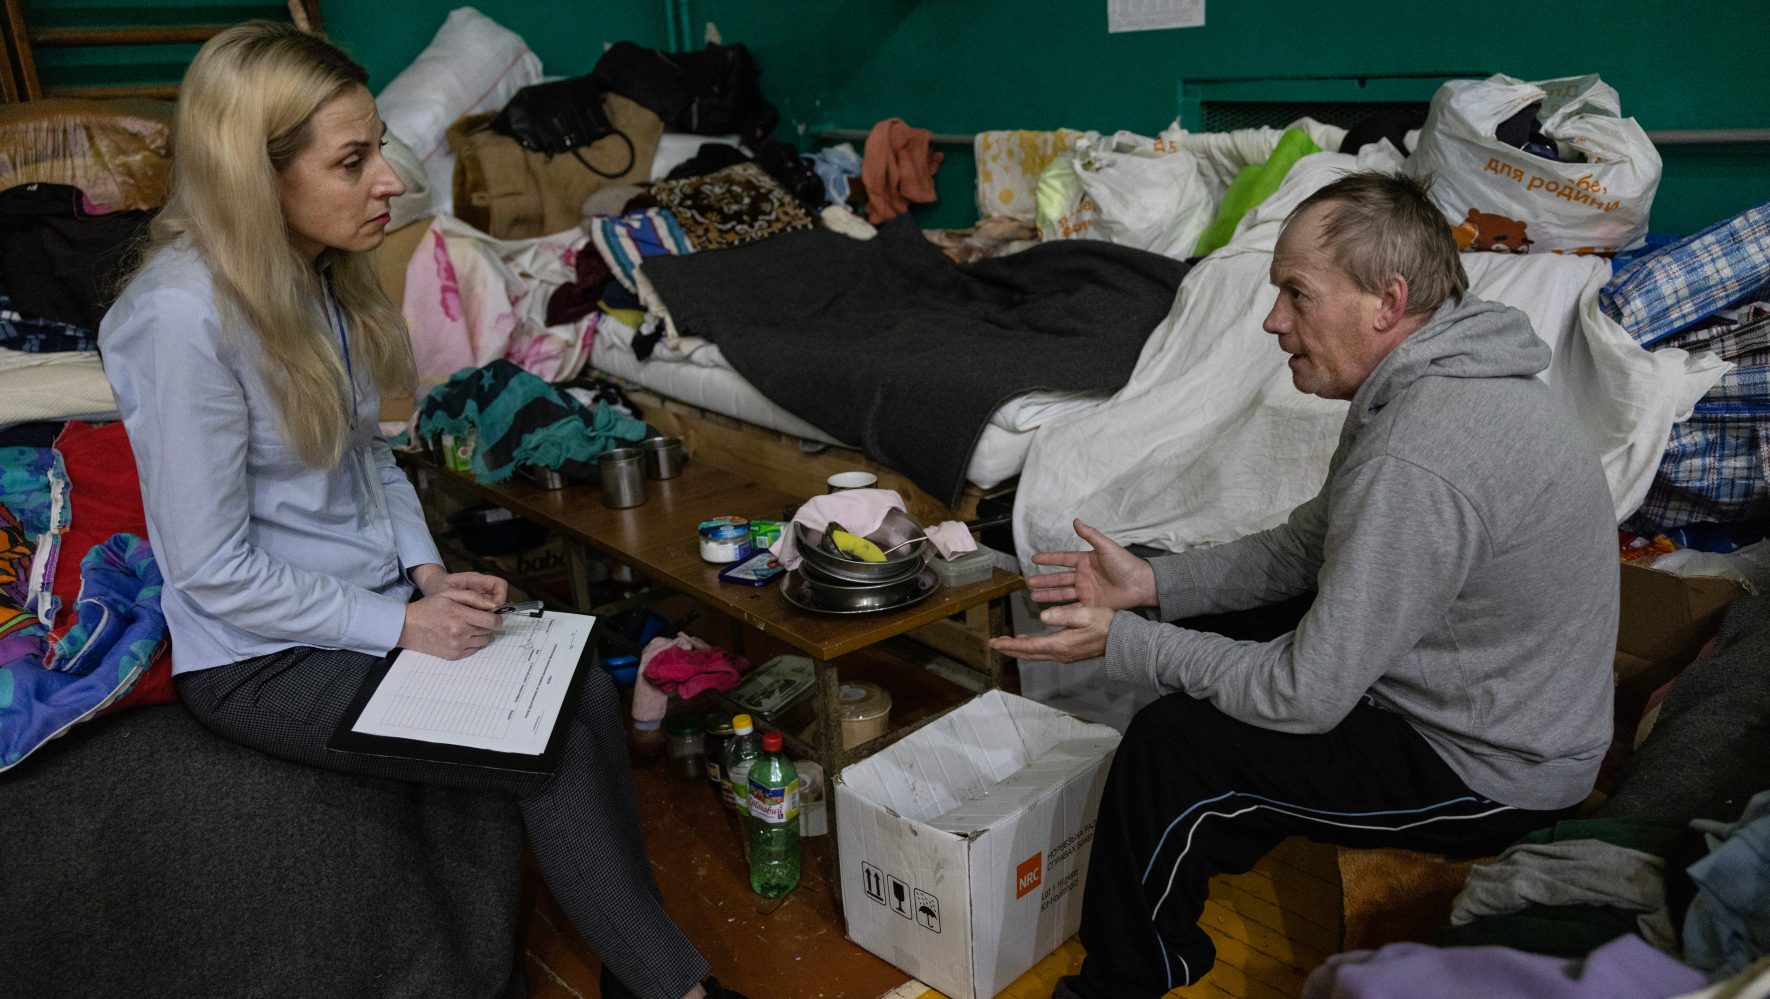 Olena Leshkovich, an associate in mental health and psychosocial services at HIAS Ukraine, speaks with Oleg Gaduchka at a shelter in Lviv, Ukraine, on February 8, 2023. Gaduchka is an internally displaced person who fled Bakhmut, in eastern Ukraine. (Paula Bronstein for HIAS)